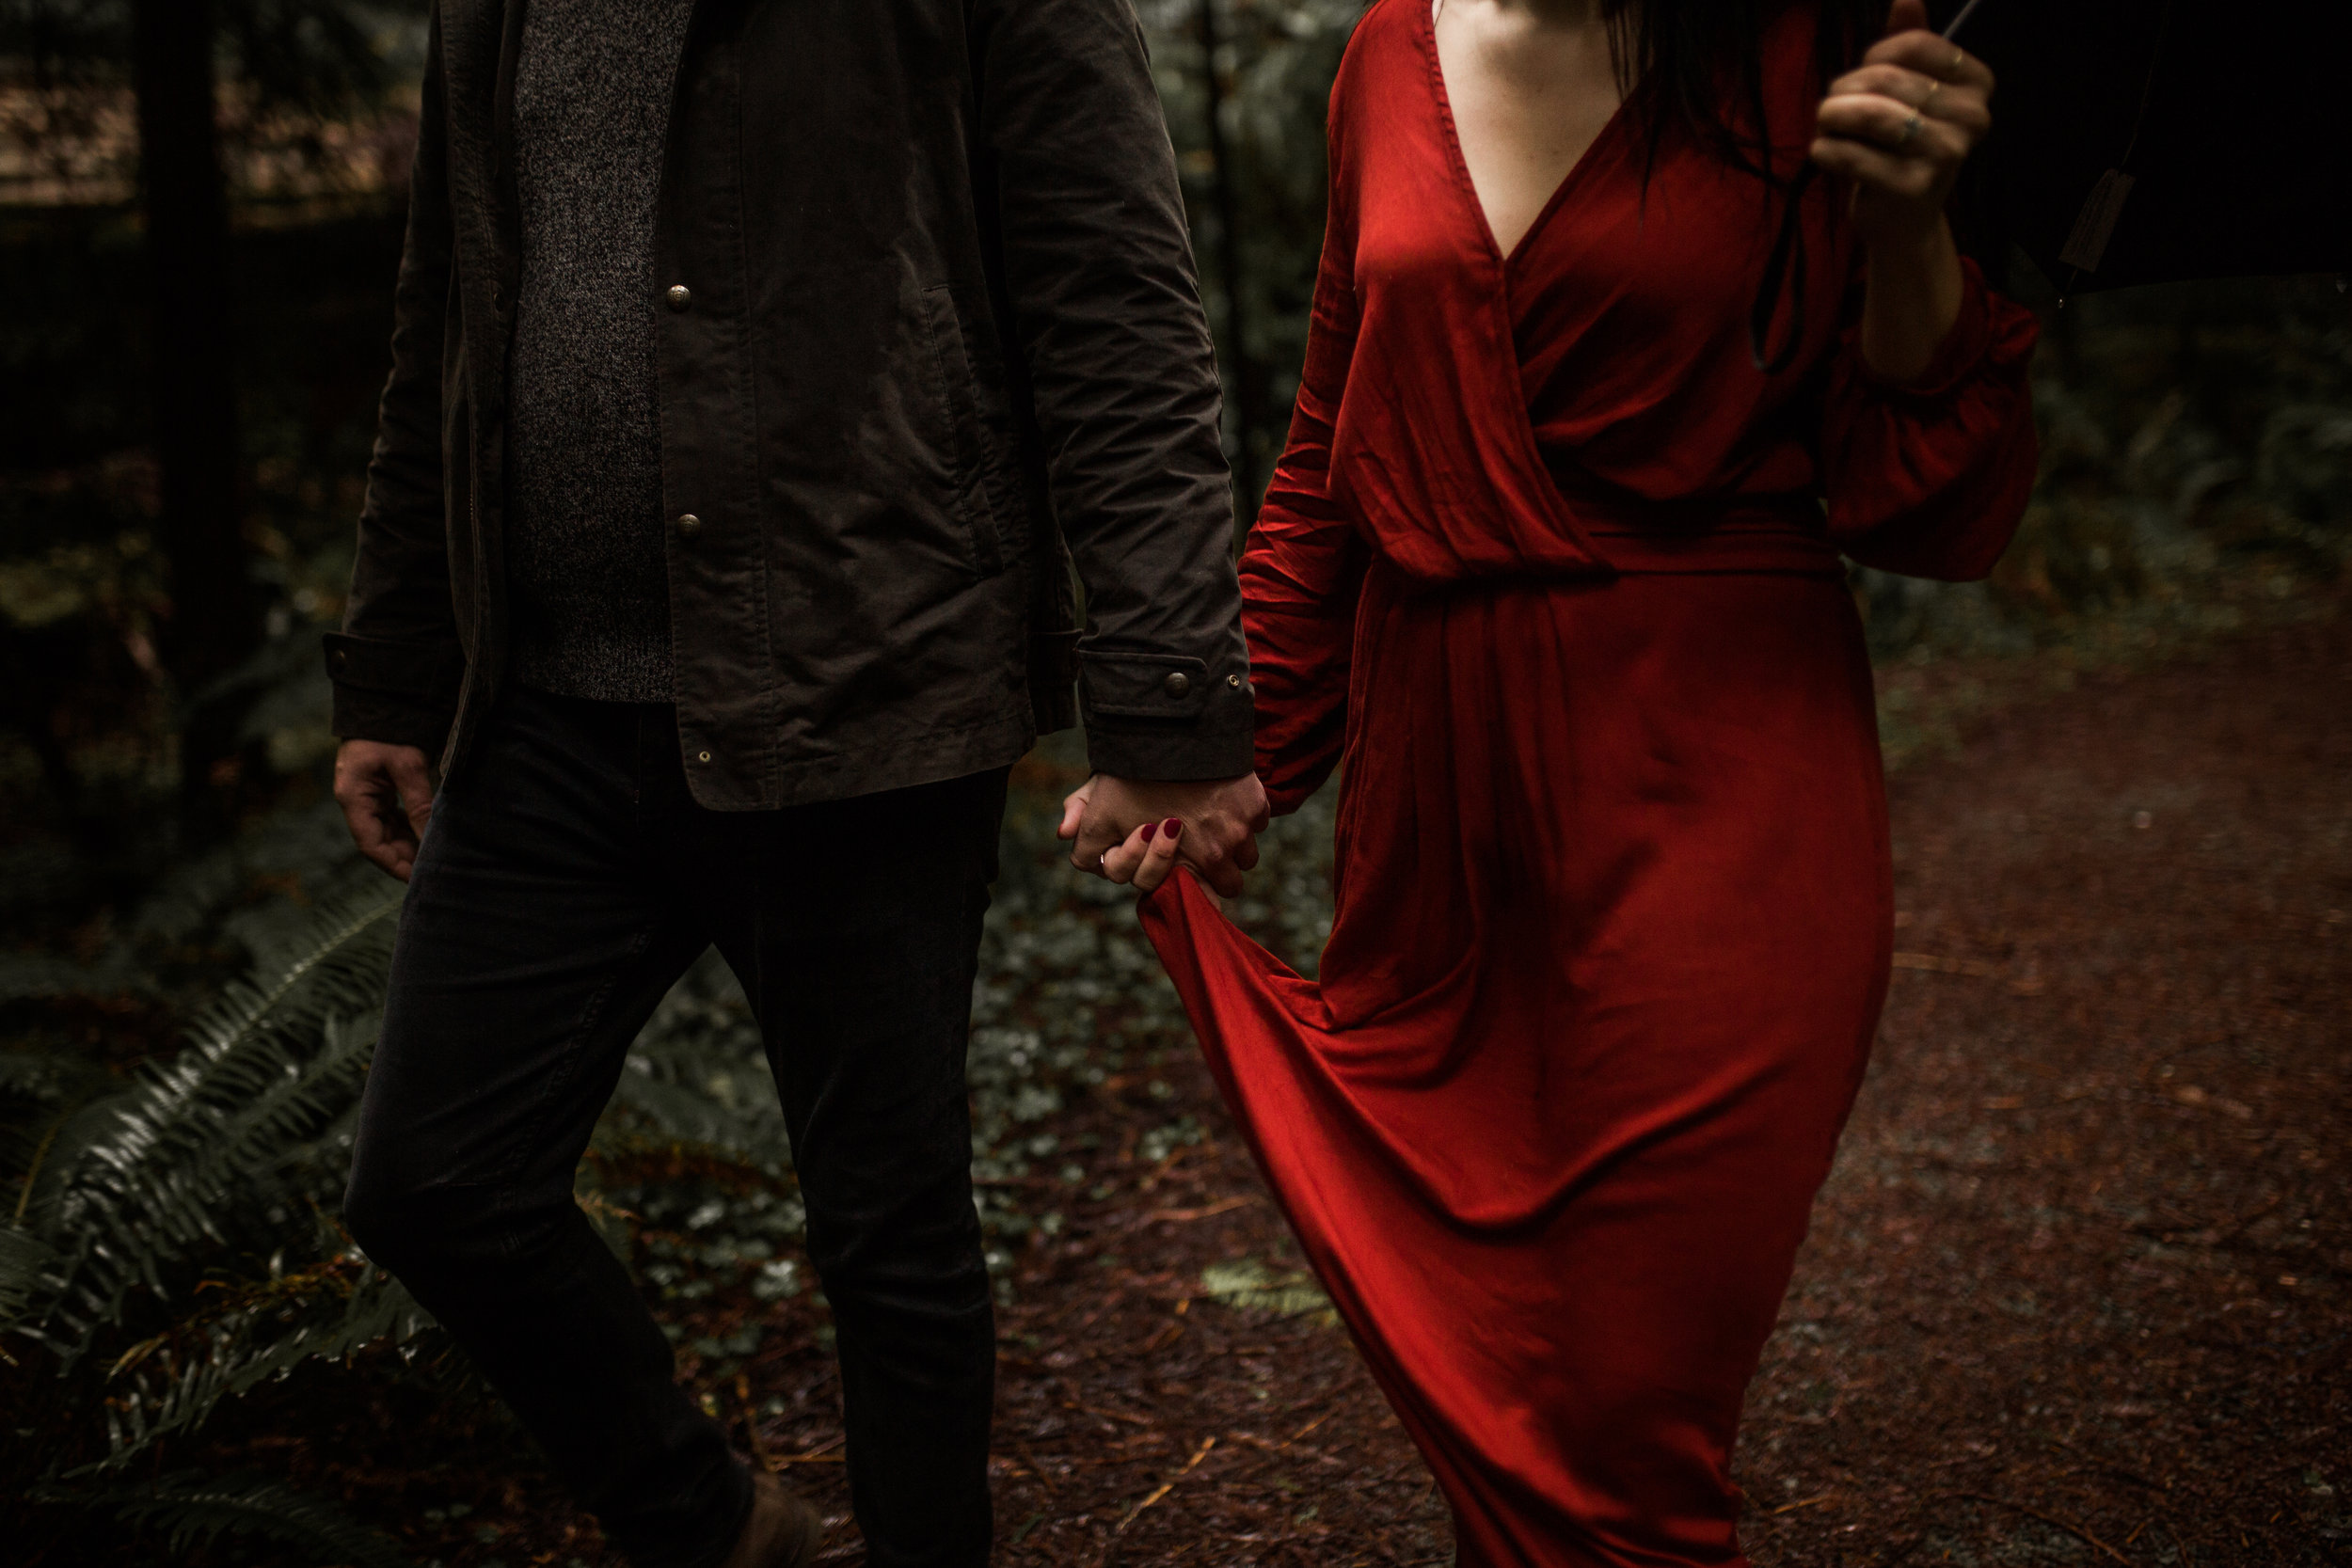 nicole-daacke-photography-redwoods-national-park-forest-rainy-foggy-adventure-engagement-session-humboldt-county-old-growth-redwood-tree-elopement-intimate-wedding-photographer-50.jpg